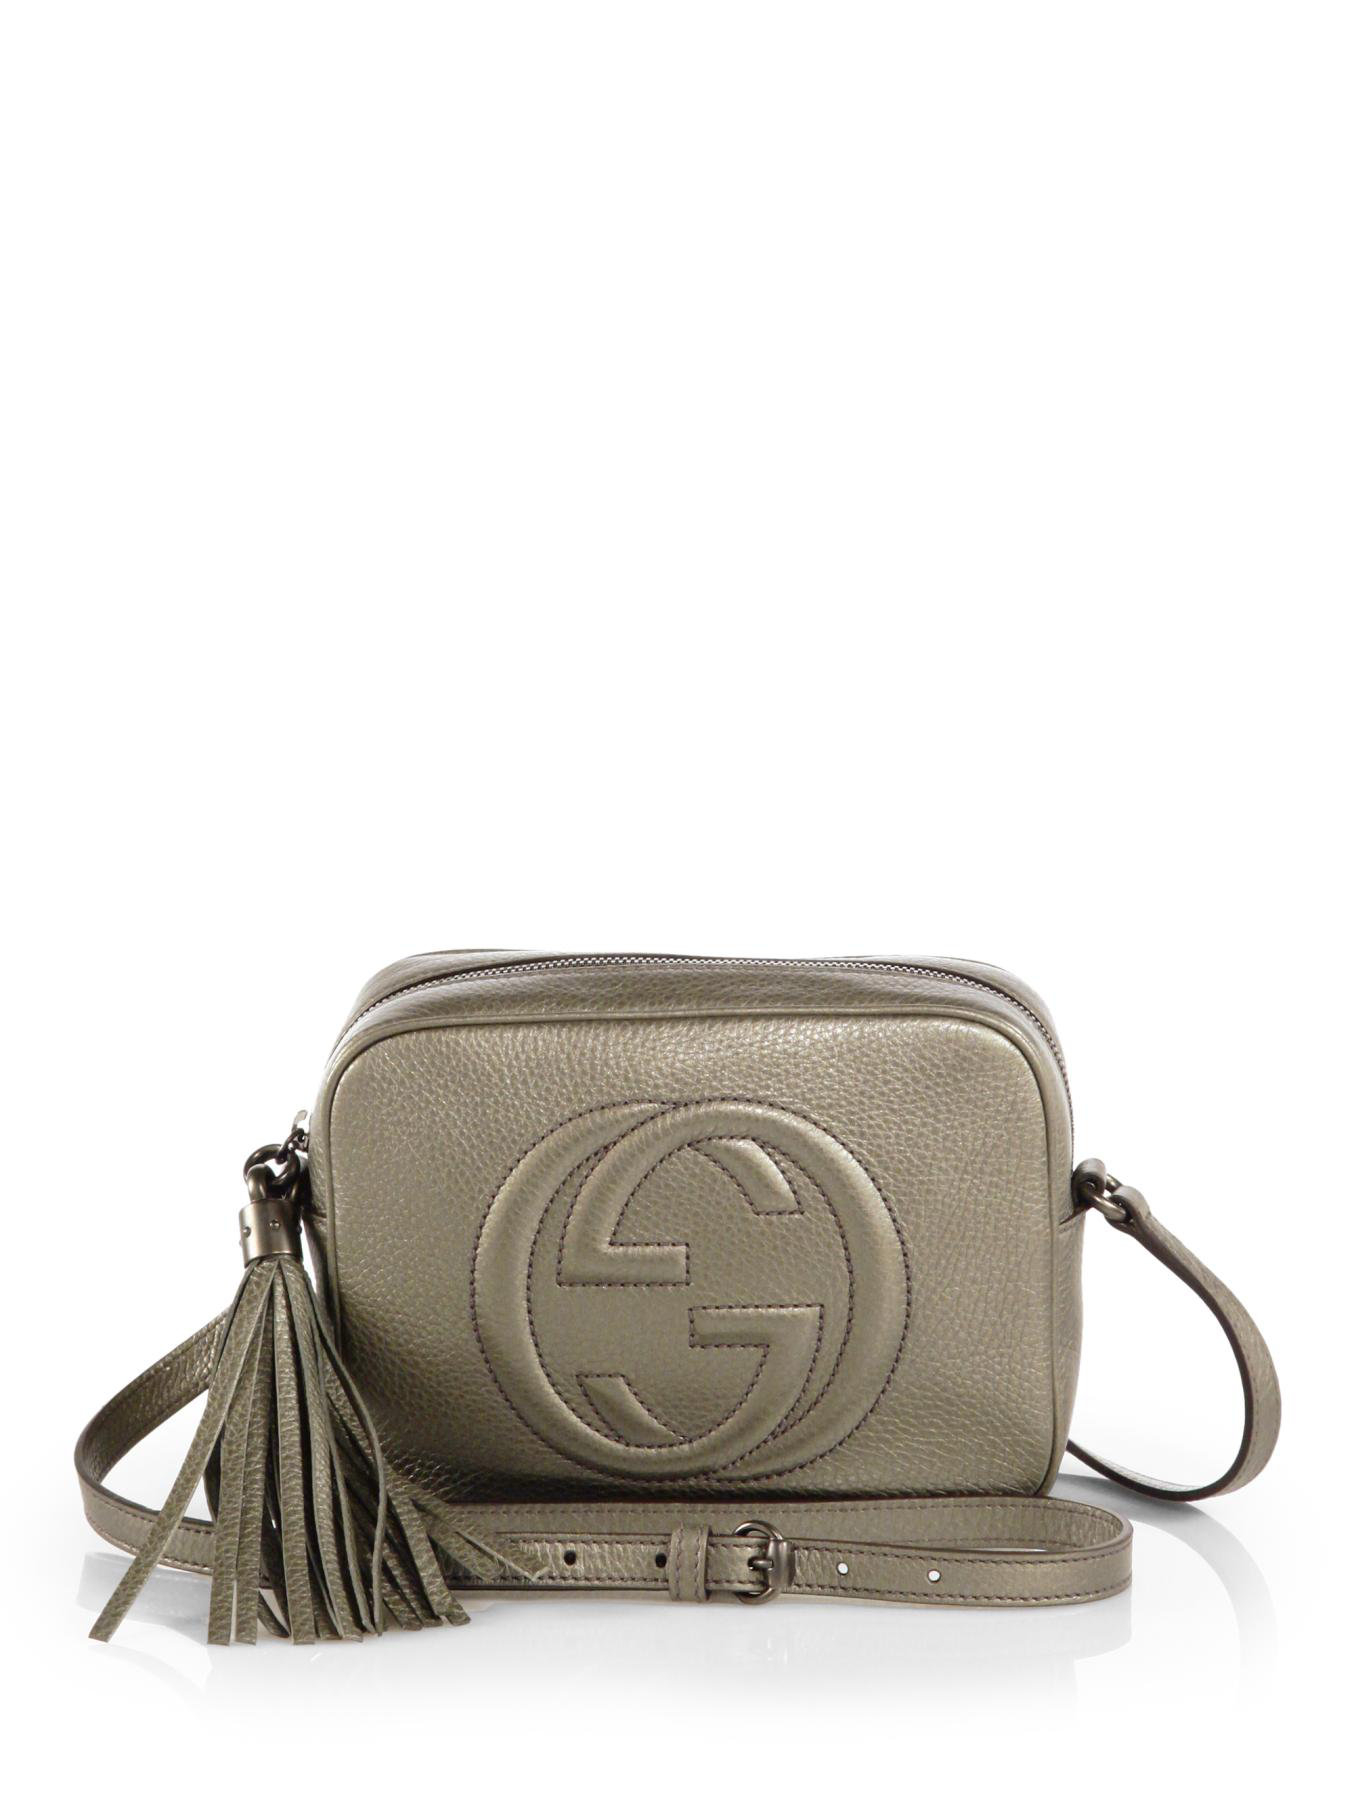 Shop Gucci, Marmont, Soho, Dionysus Bags & More